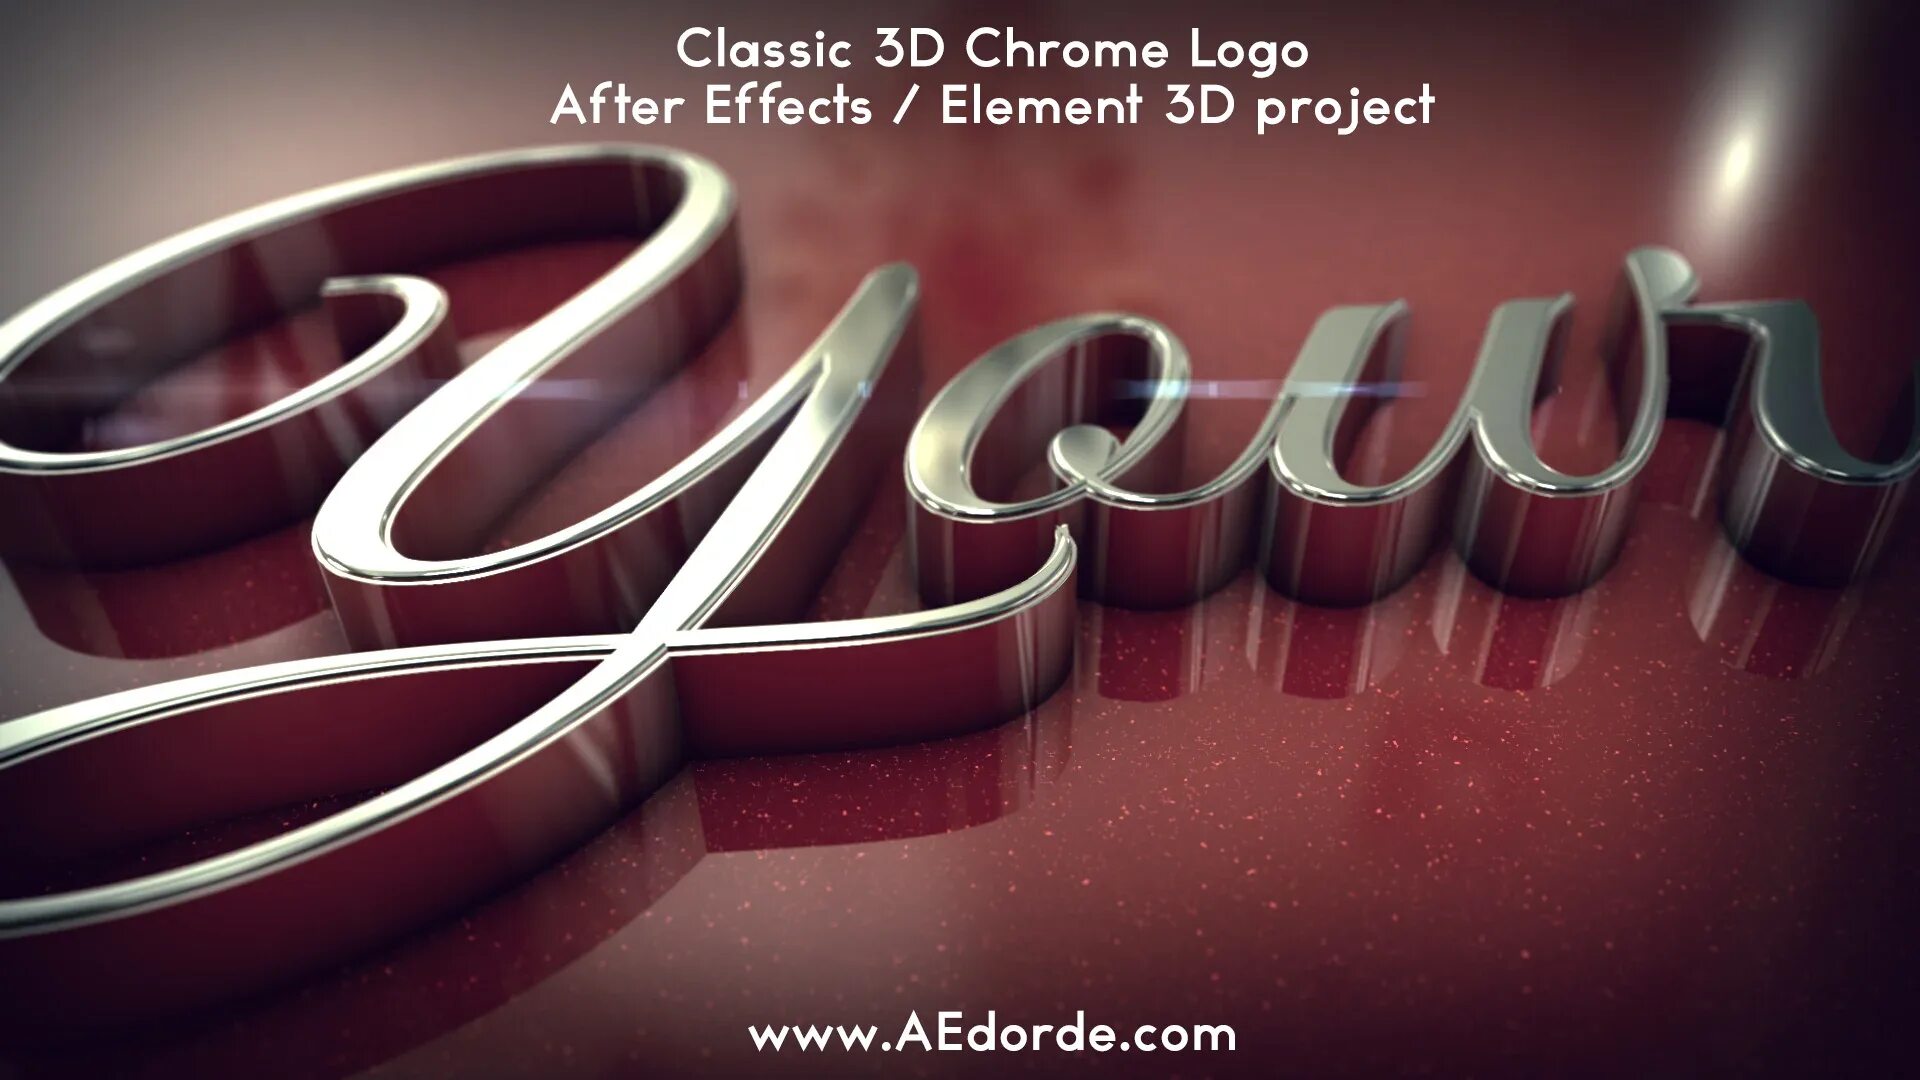 Логотип after Effects. Хромированный логотип. 3d логотип AE. After Effects 3d логотип.